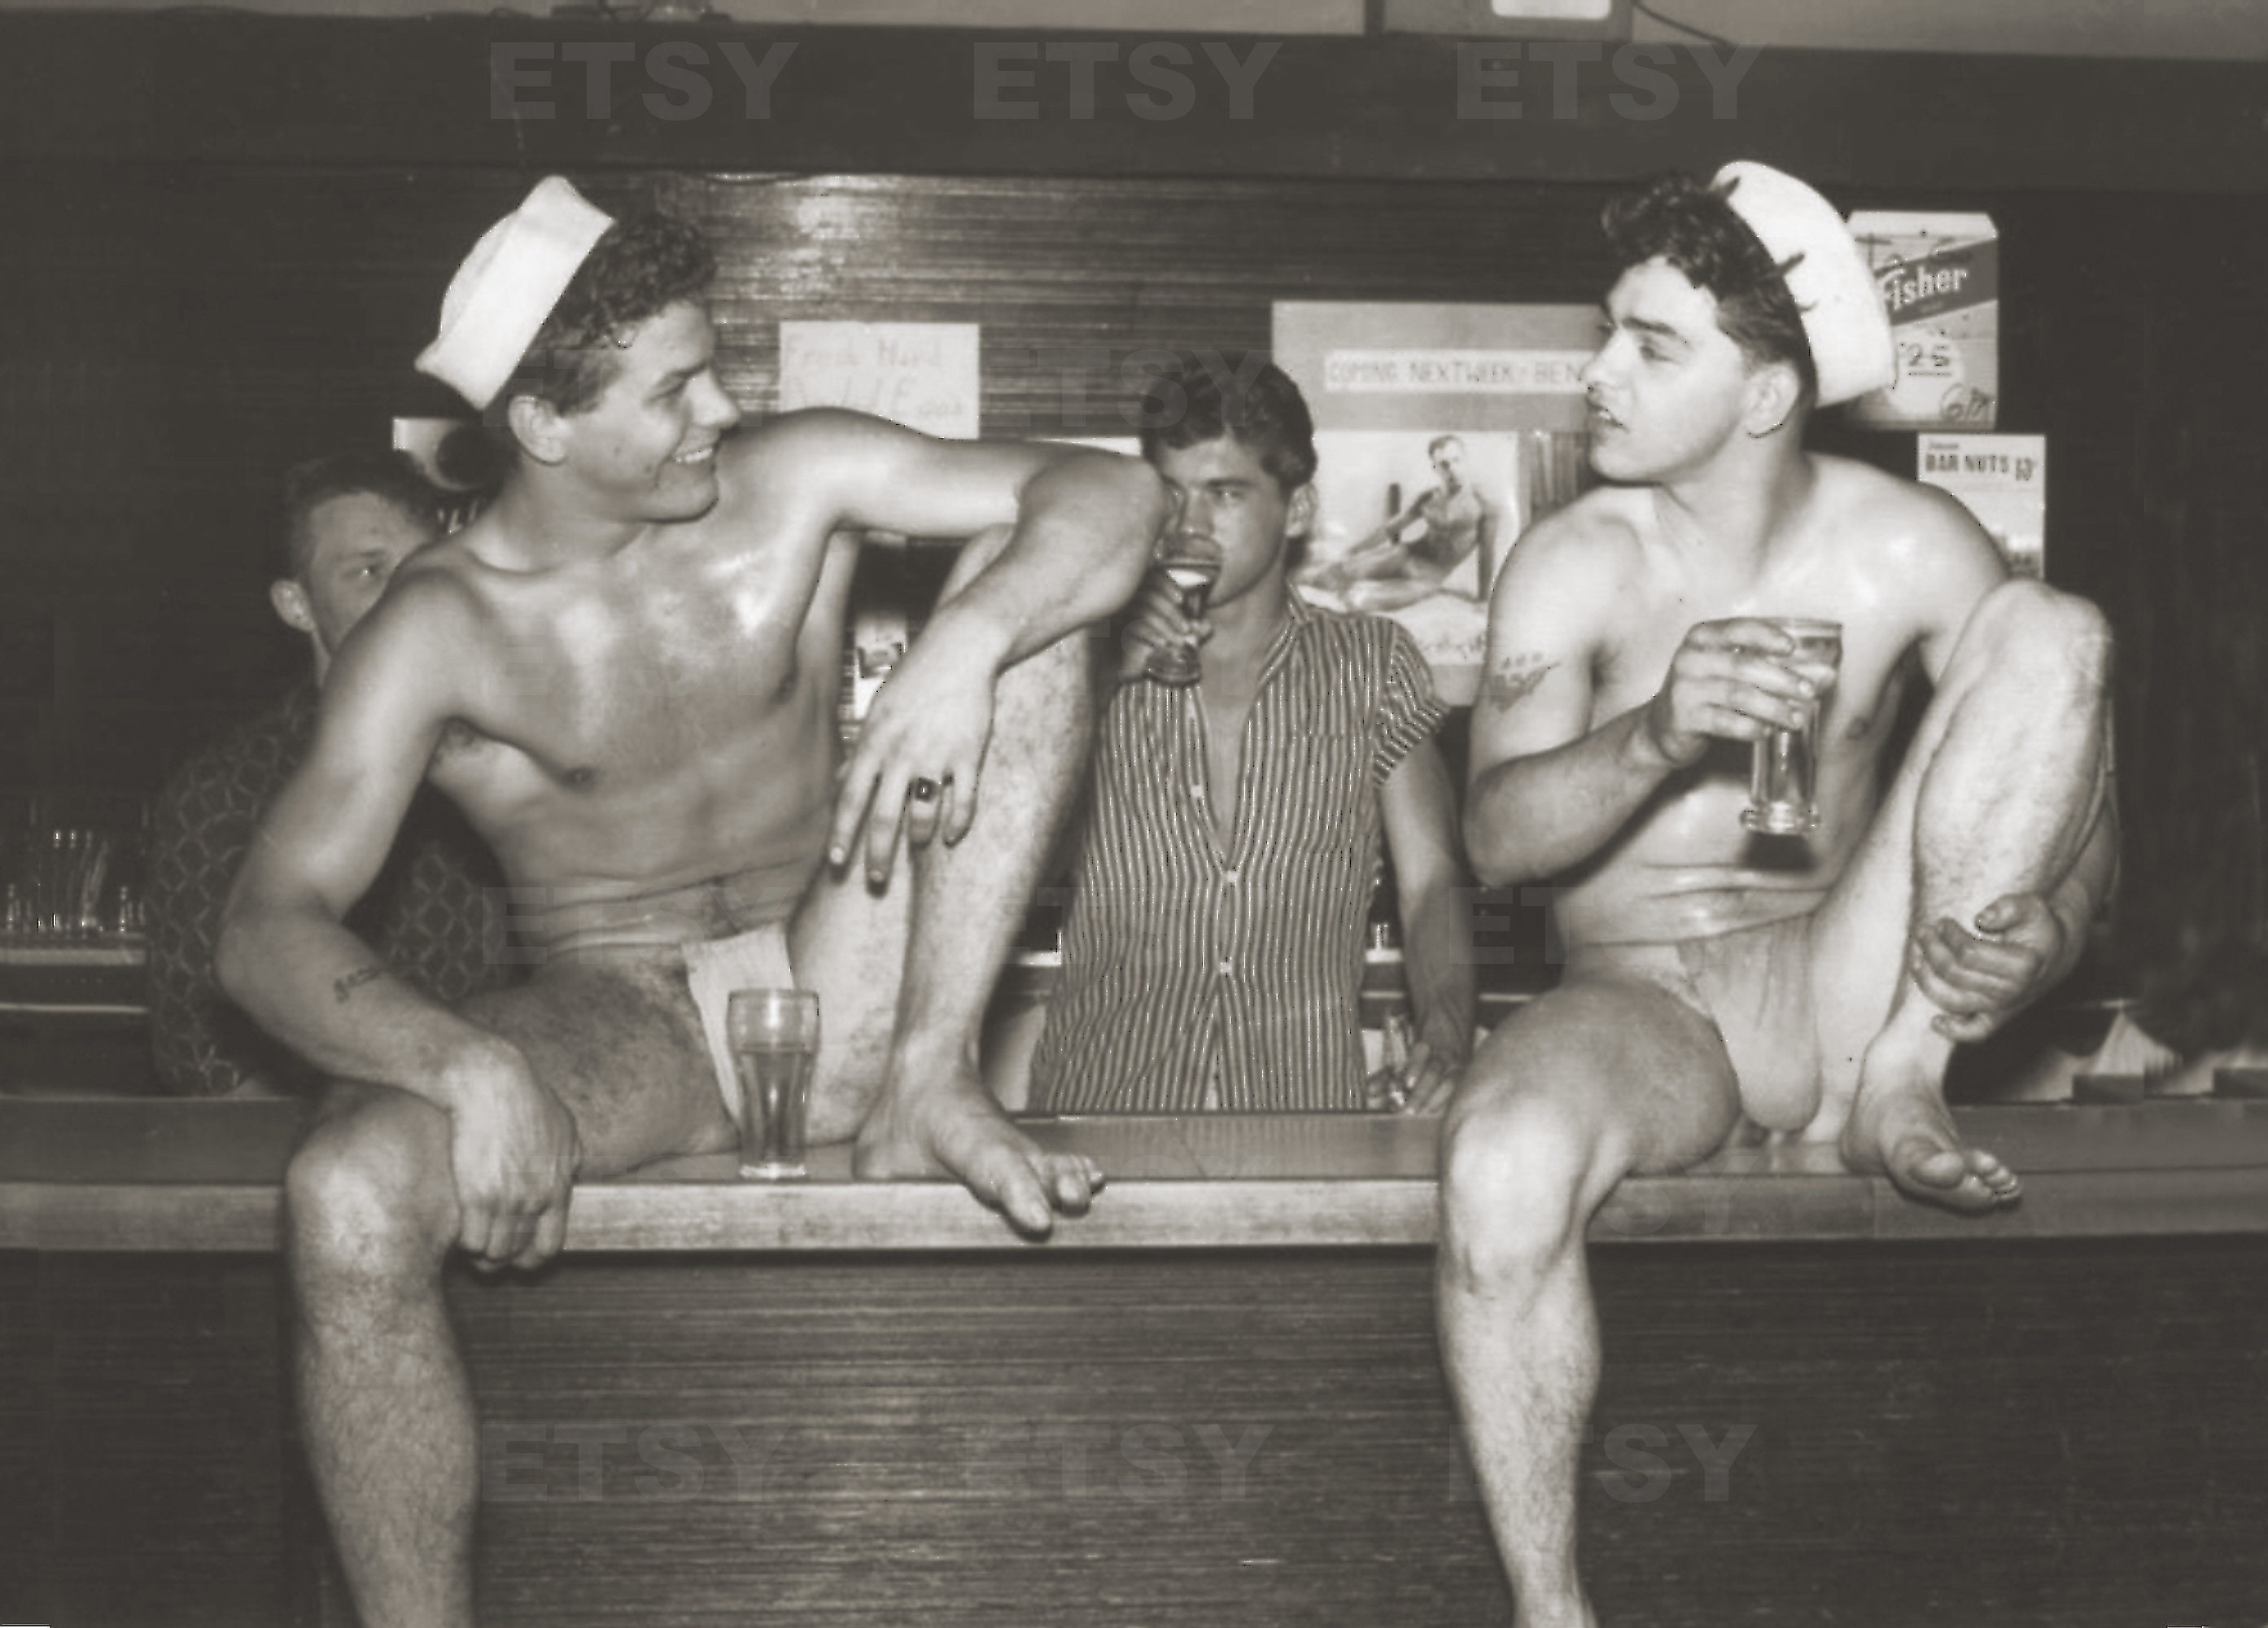 1940s Nude Porn - Sailors Bar Vintage Photo 1940s Male Nude Photography - Etsy New Zealand